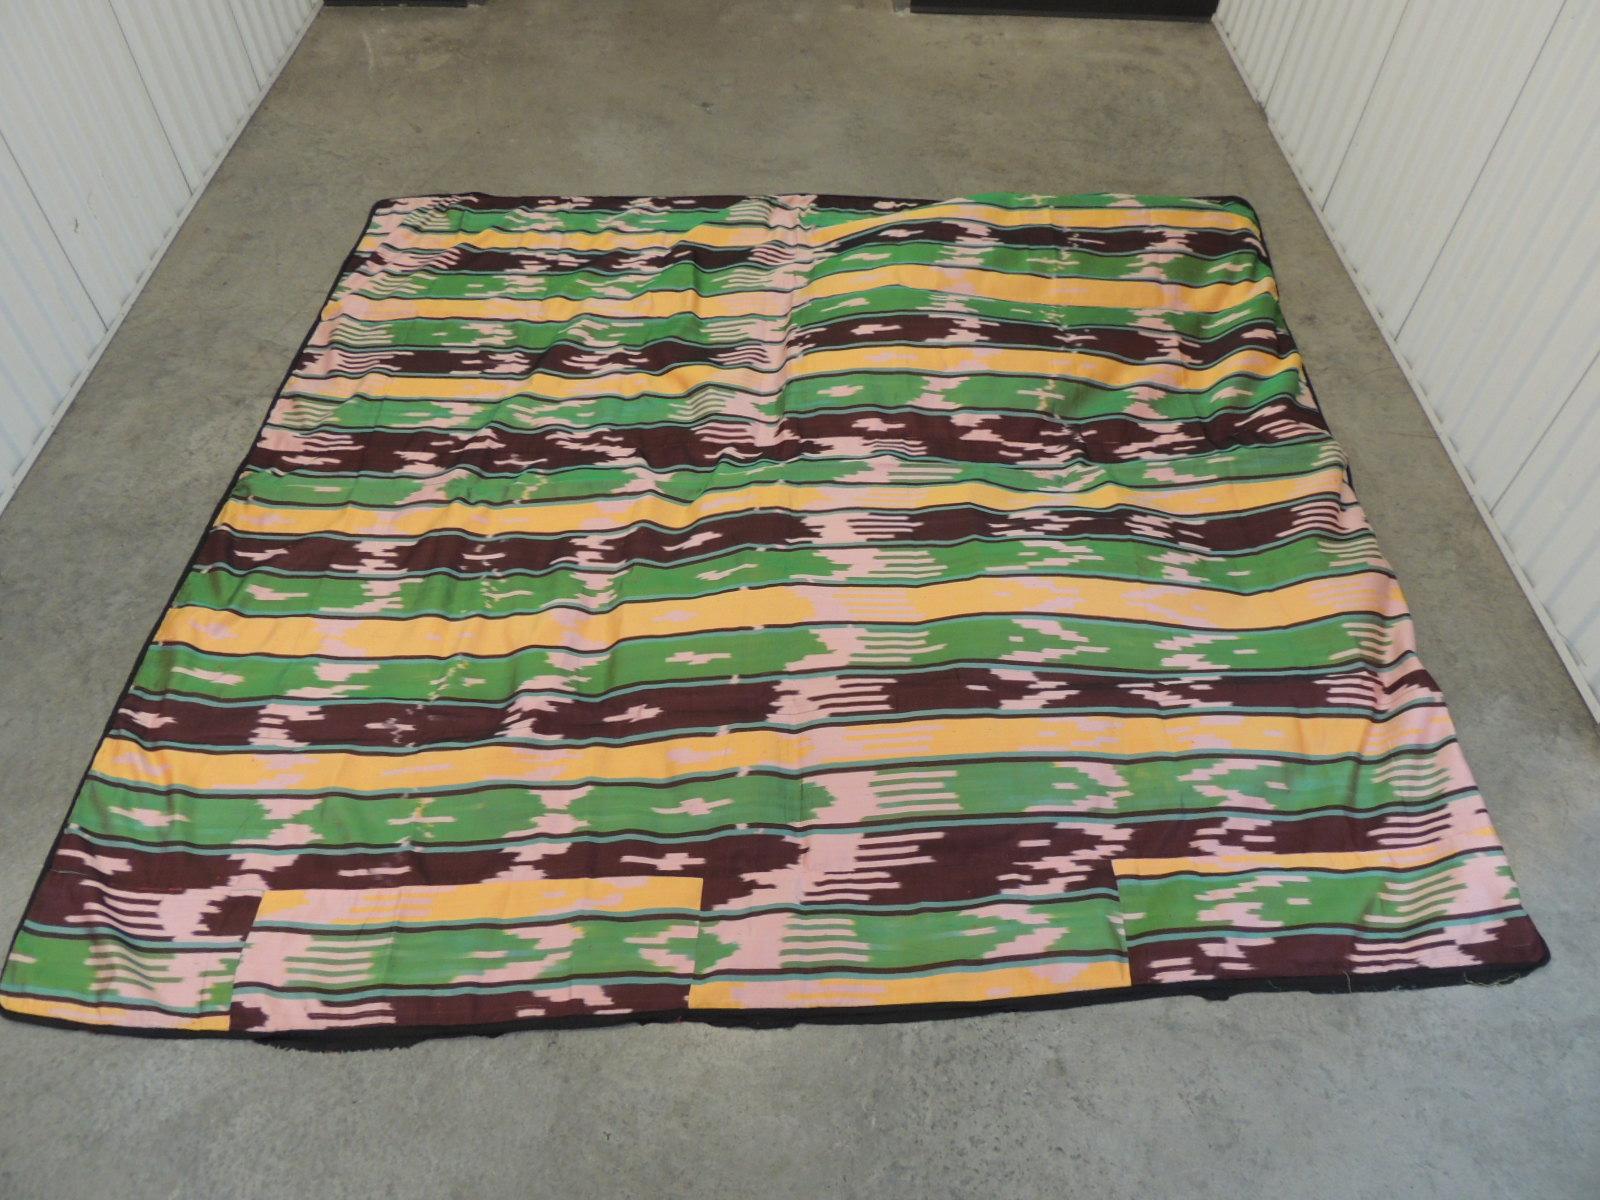 Monumental vintage yellow and green silk Ikat panel,
a few pieces sewn together to create this large cloth.
Finished edges all around.
In shades of green, yellow, purple and light pink.
Ideal for pillows, wall hanging or table cloth.
Size: 78